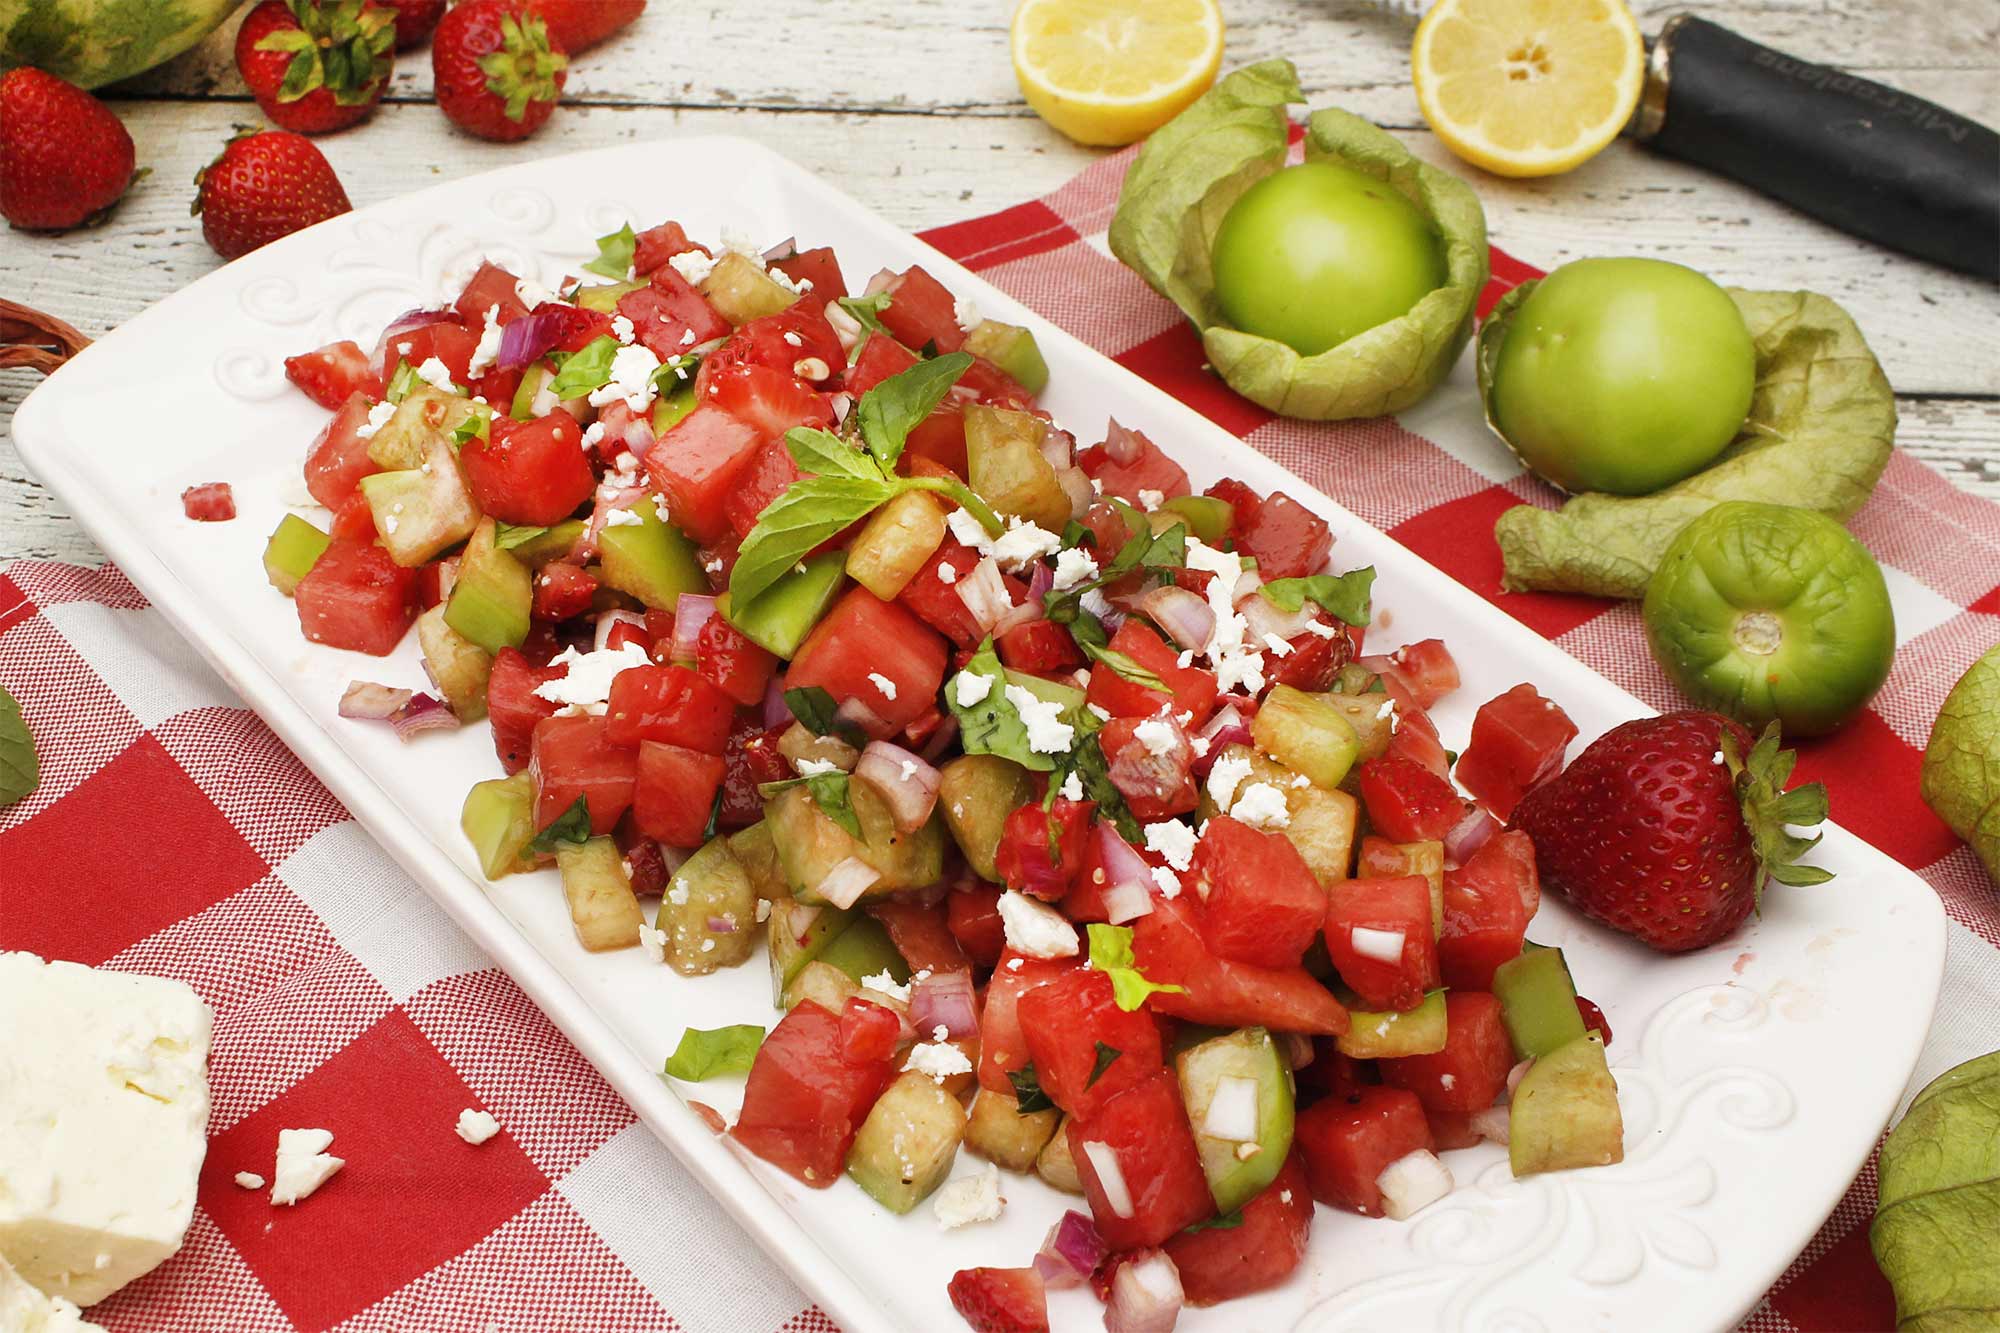 Tomatillo Salad with Watermelon and Strawberry